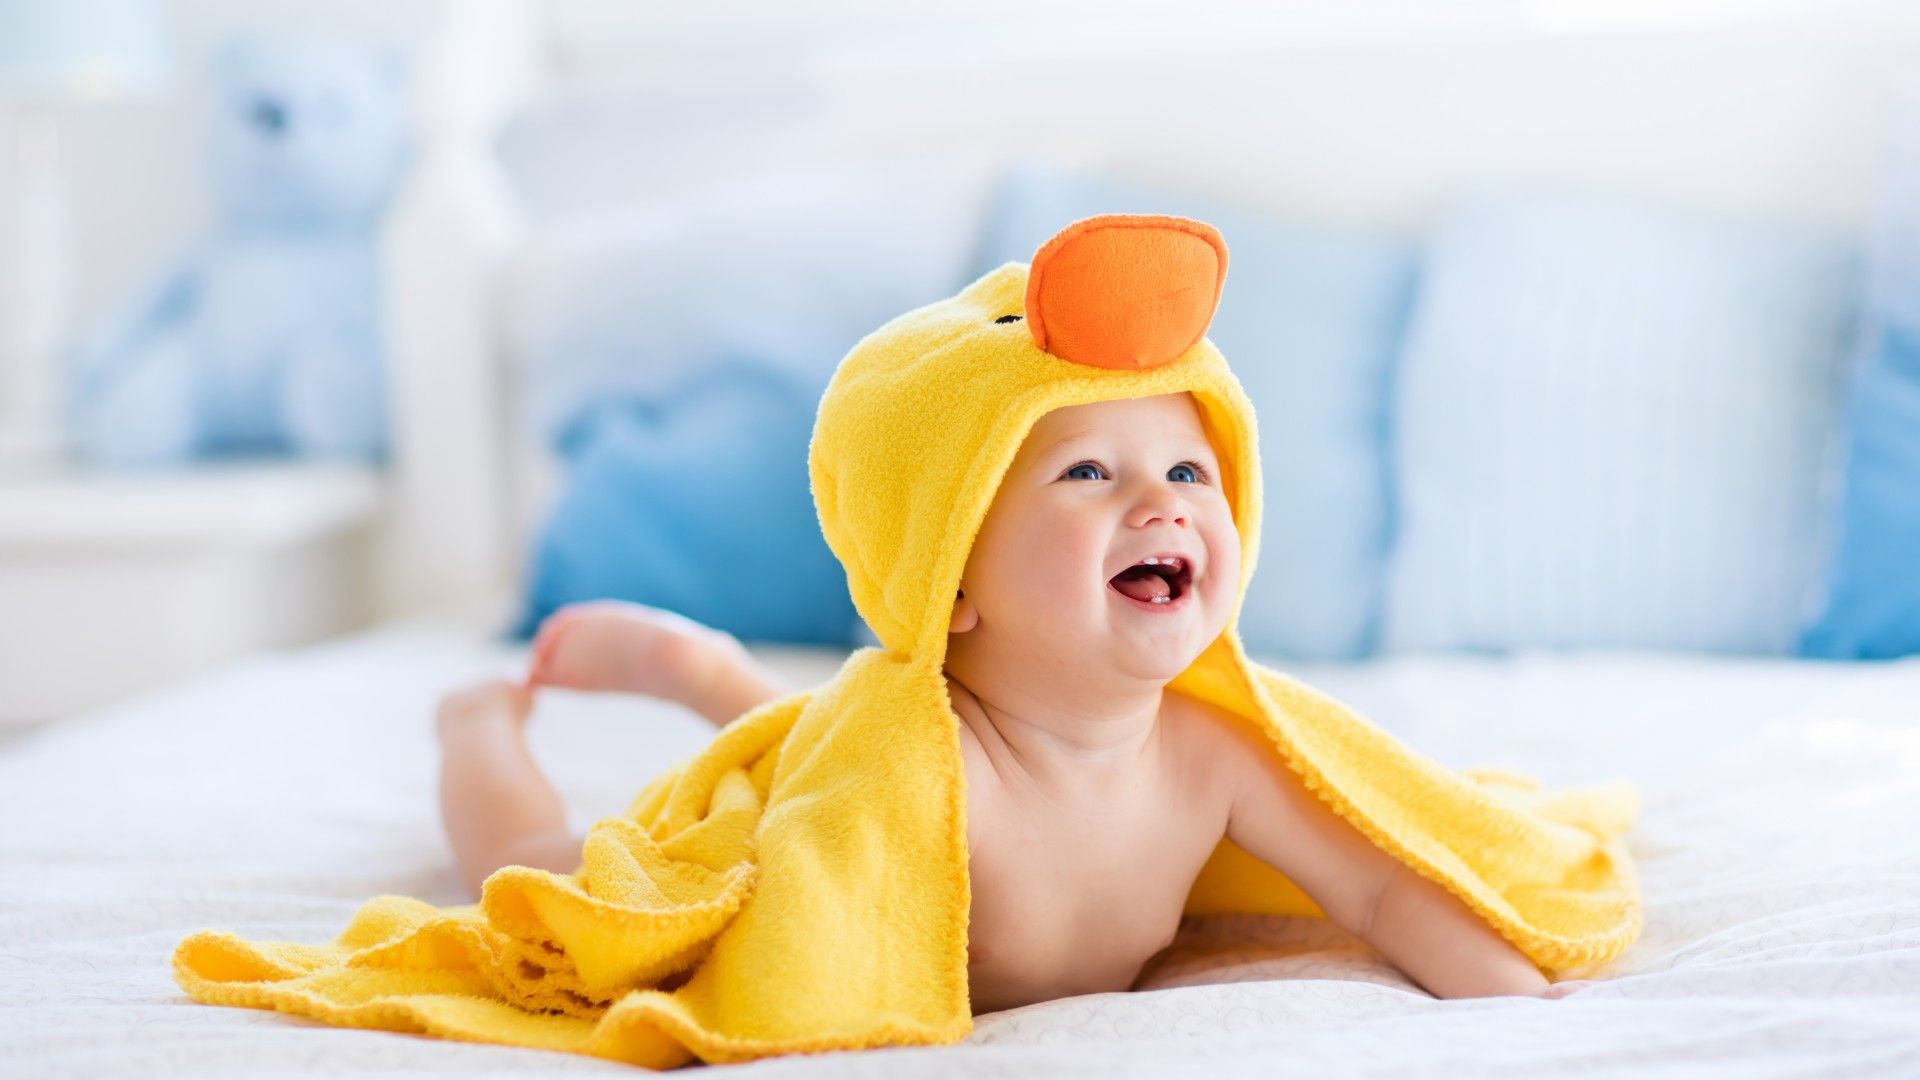 Wallpaper Cute baby, Laugh, After bath, Duck towel, Yellow, 4K, 8K, Cute,. Wallpaper for iPhone, Android, Mobile and Desktop